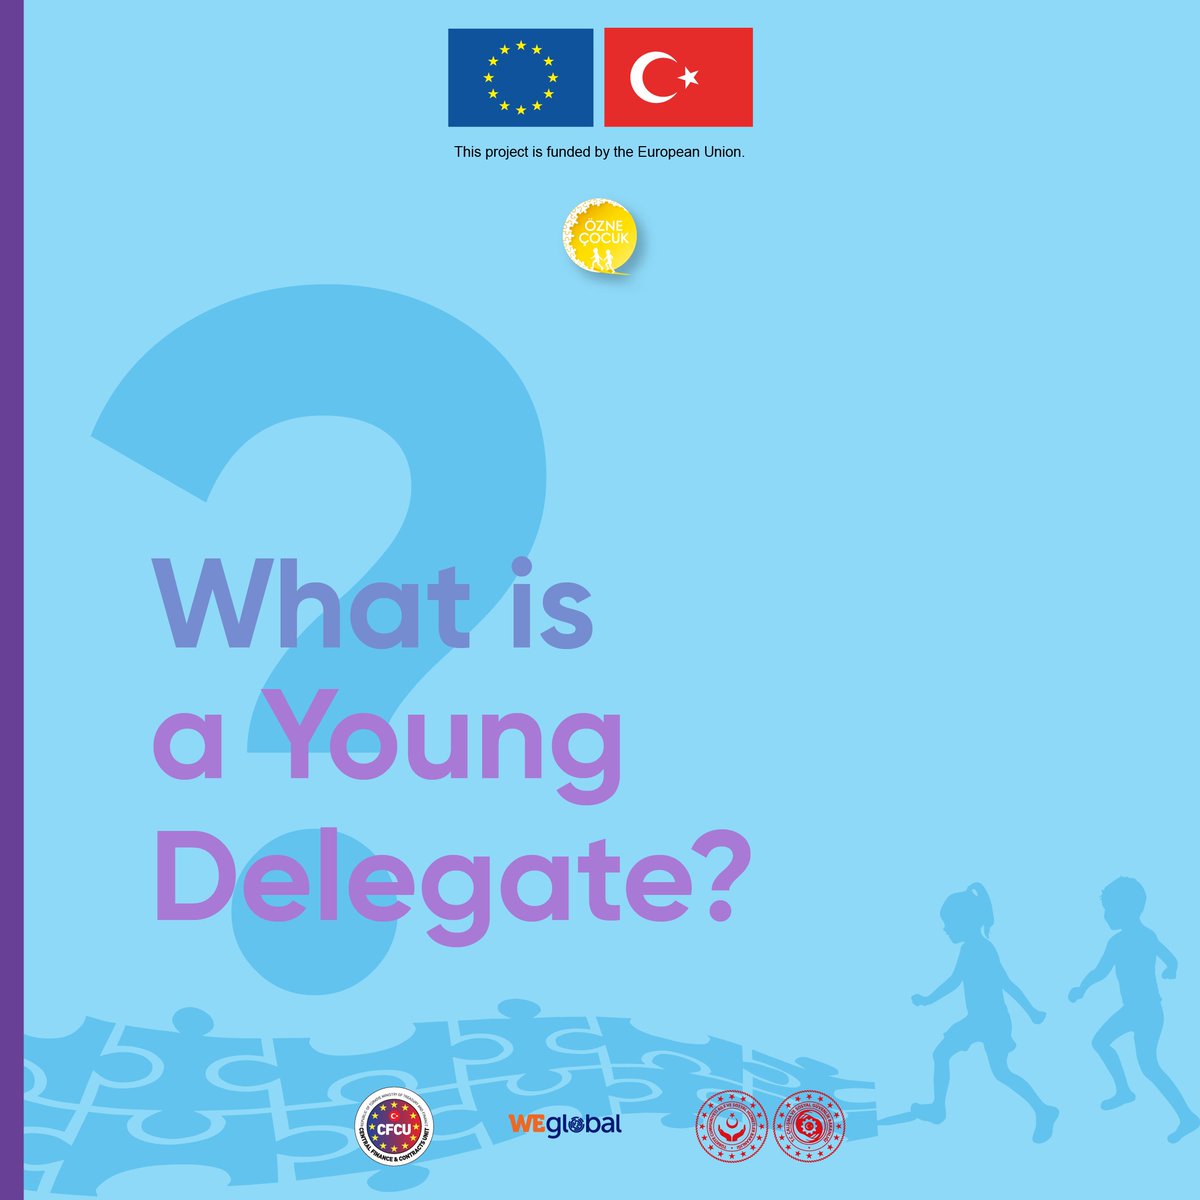 It refers to a child elected annually through an internal election among children to enhance the efficiency of services provided in institutions and to ensure children's participation in service and management.
#özneçocuk #childrights #childfriendlypolicies